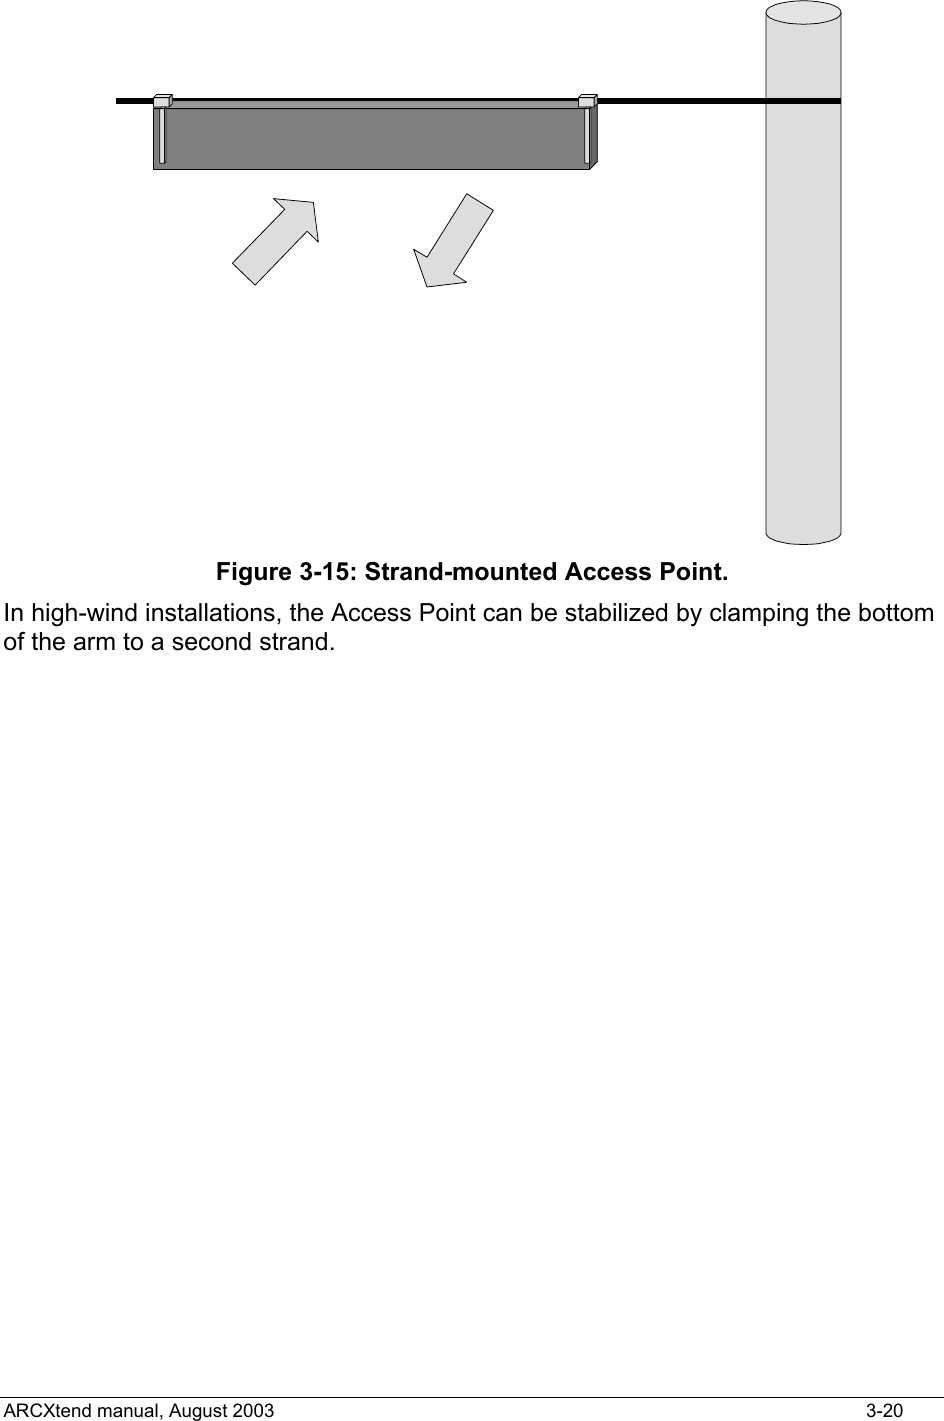   Figure 3-15: Strand-mounted Access Point. In high-wind installations, the Access Point can be stabilized by clamping the bottom of the arm to a second strand. ARCXtend manual, August 2003    3-20 